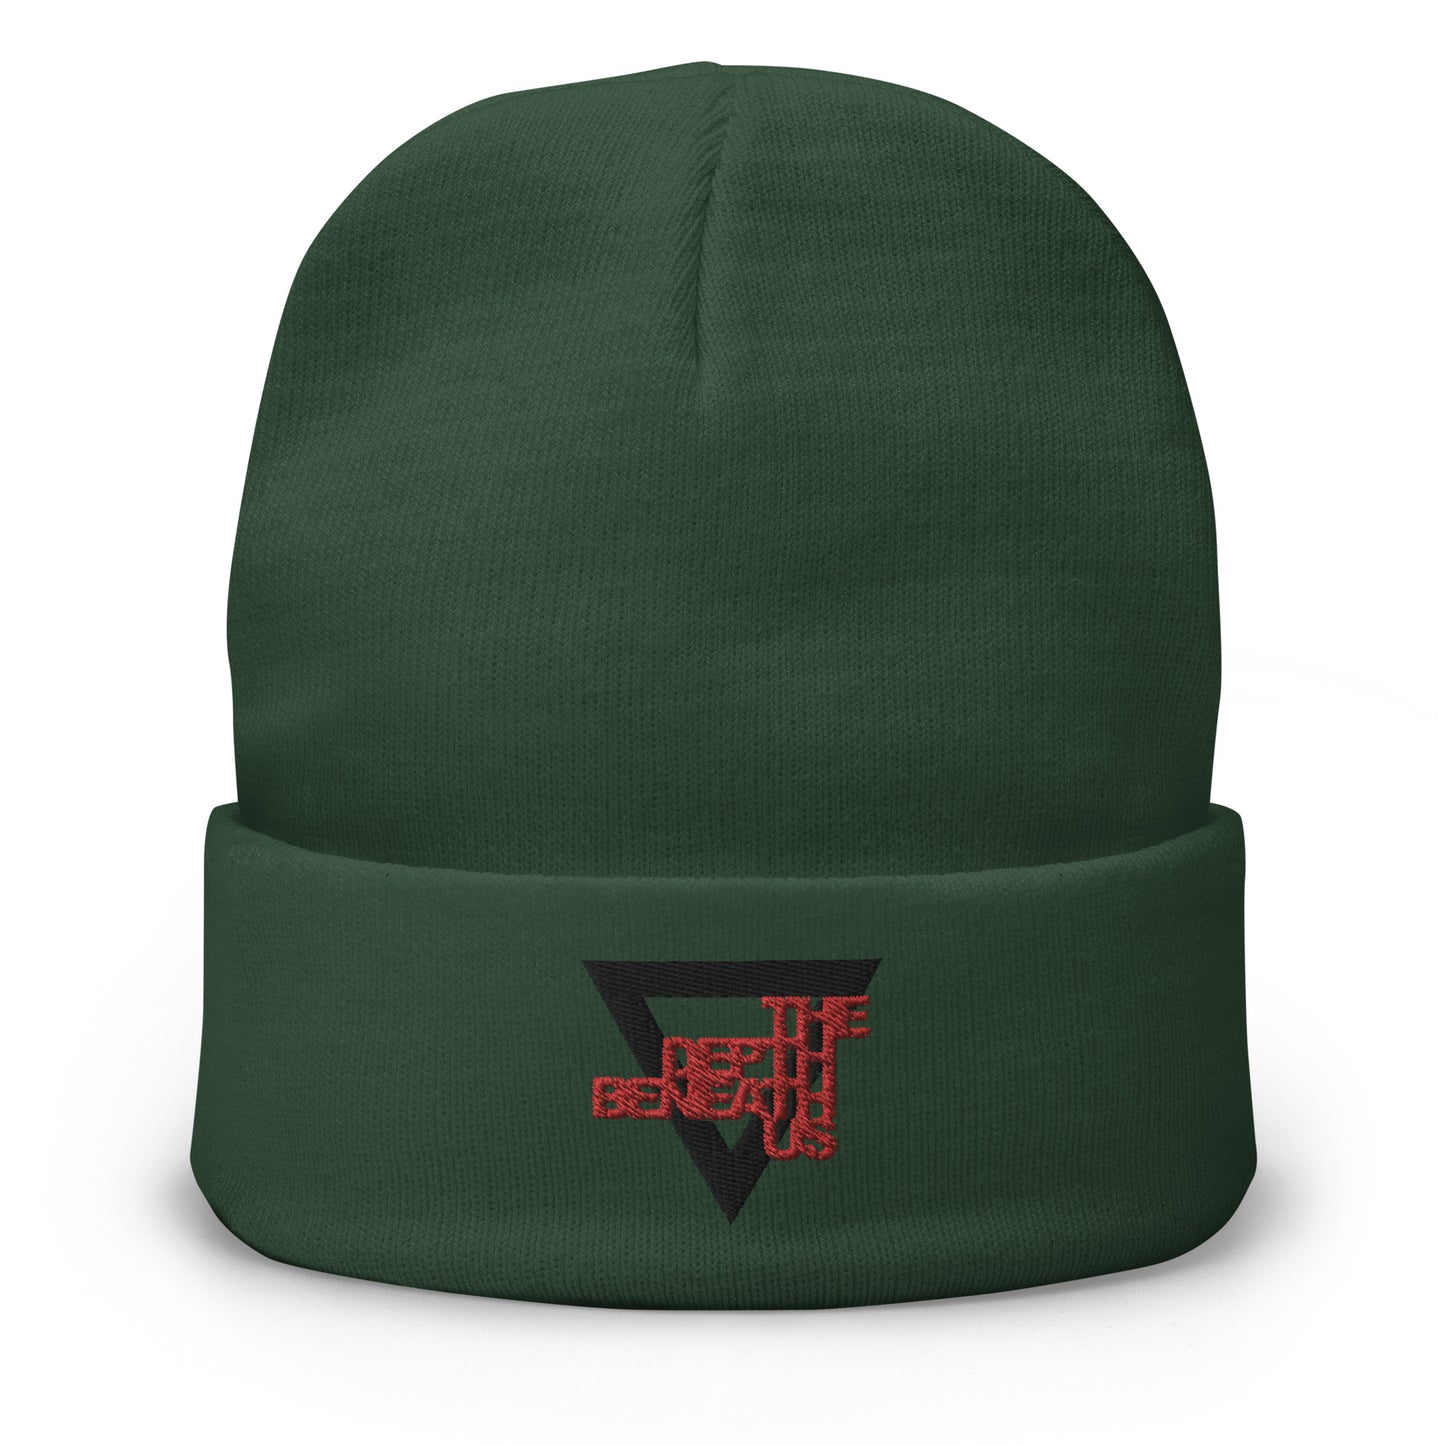 The Depth Beneath Us - Embroidered Beanie